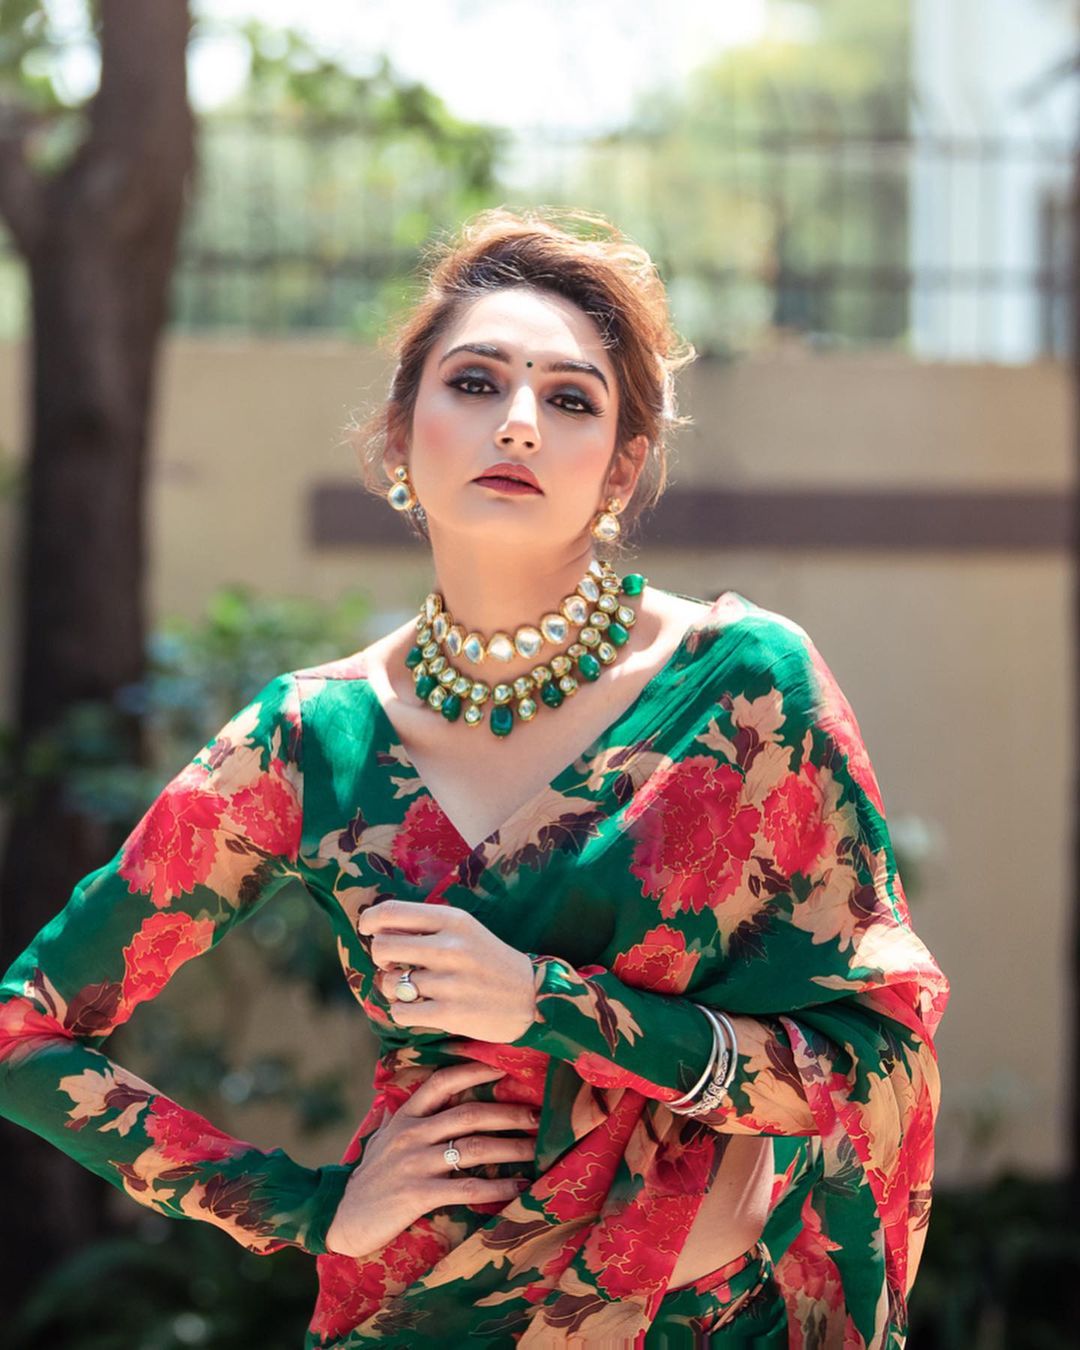 Actress ragini dwivedi is too hot in this saree look-Actressragini, Ragini Dwivedi, Raginidwivedi Photos,Spicy Hot Pics,Images,High Resolution WallPapers Download